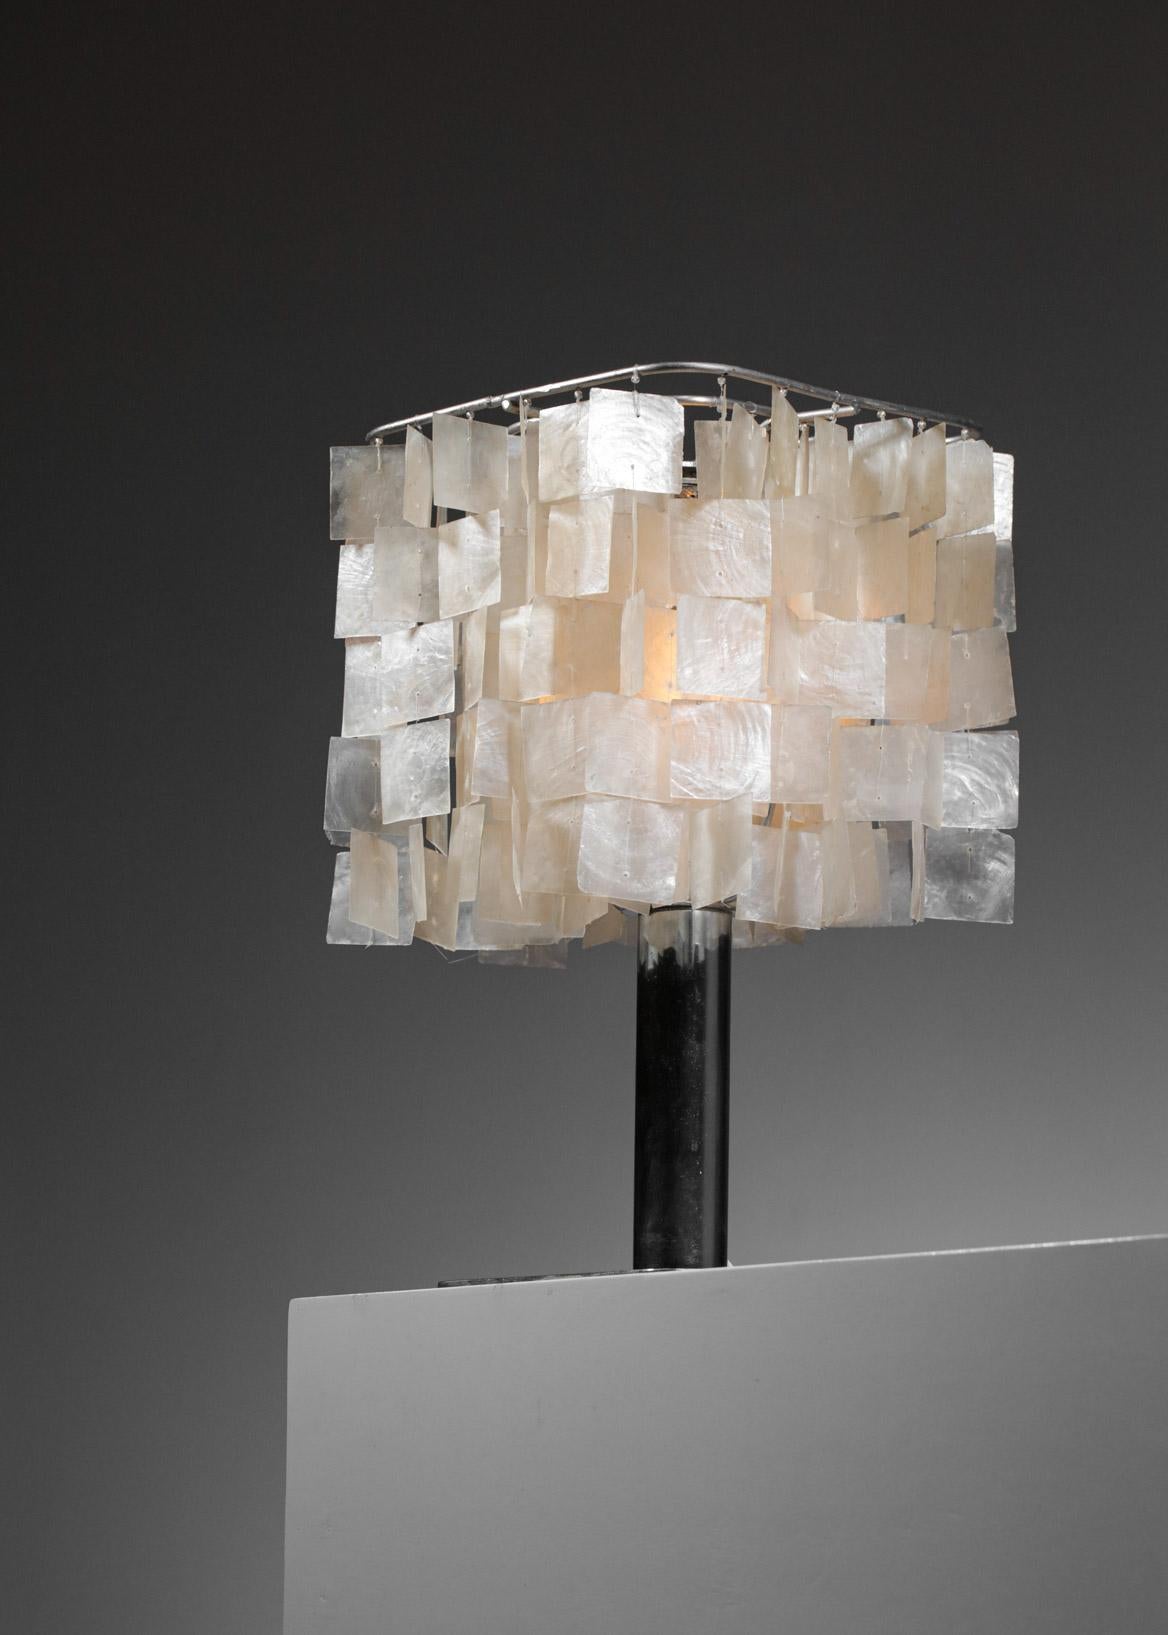 Unique Handmade Table Lamp in Mother of Pearl 70s Style Verner Panton G220 For Sale 1